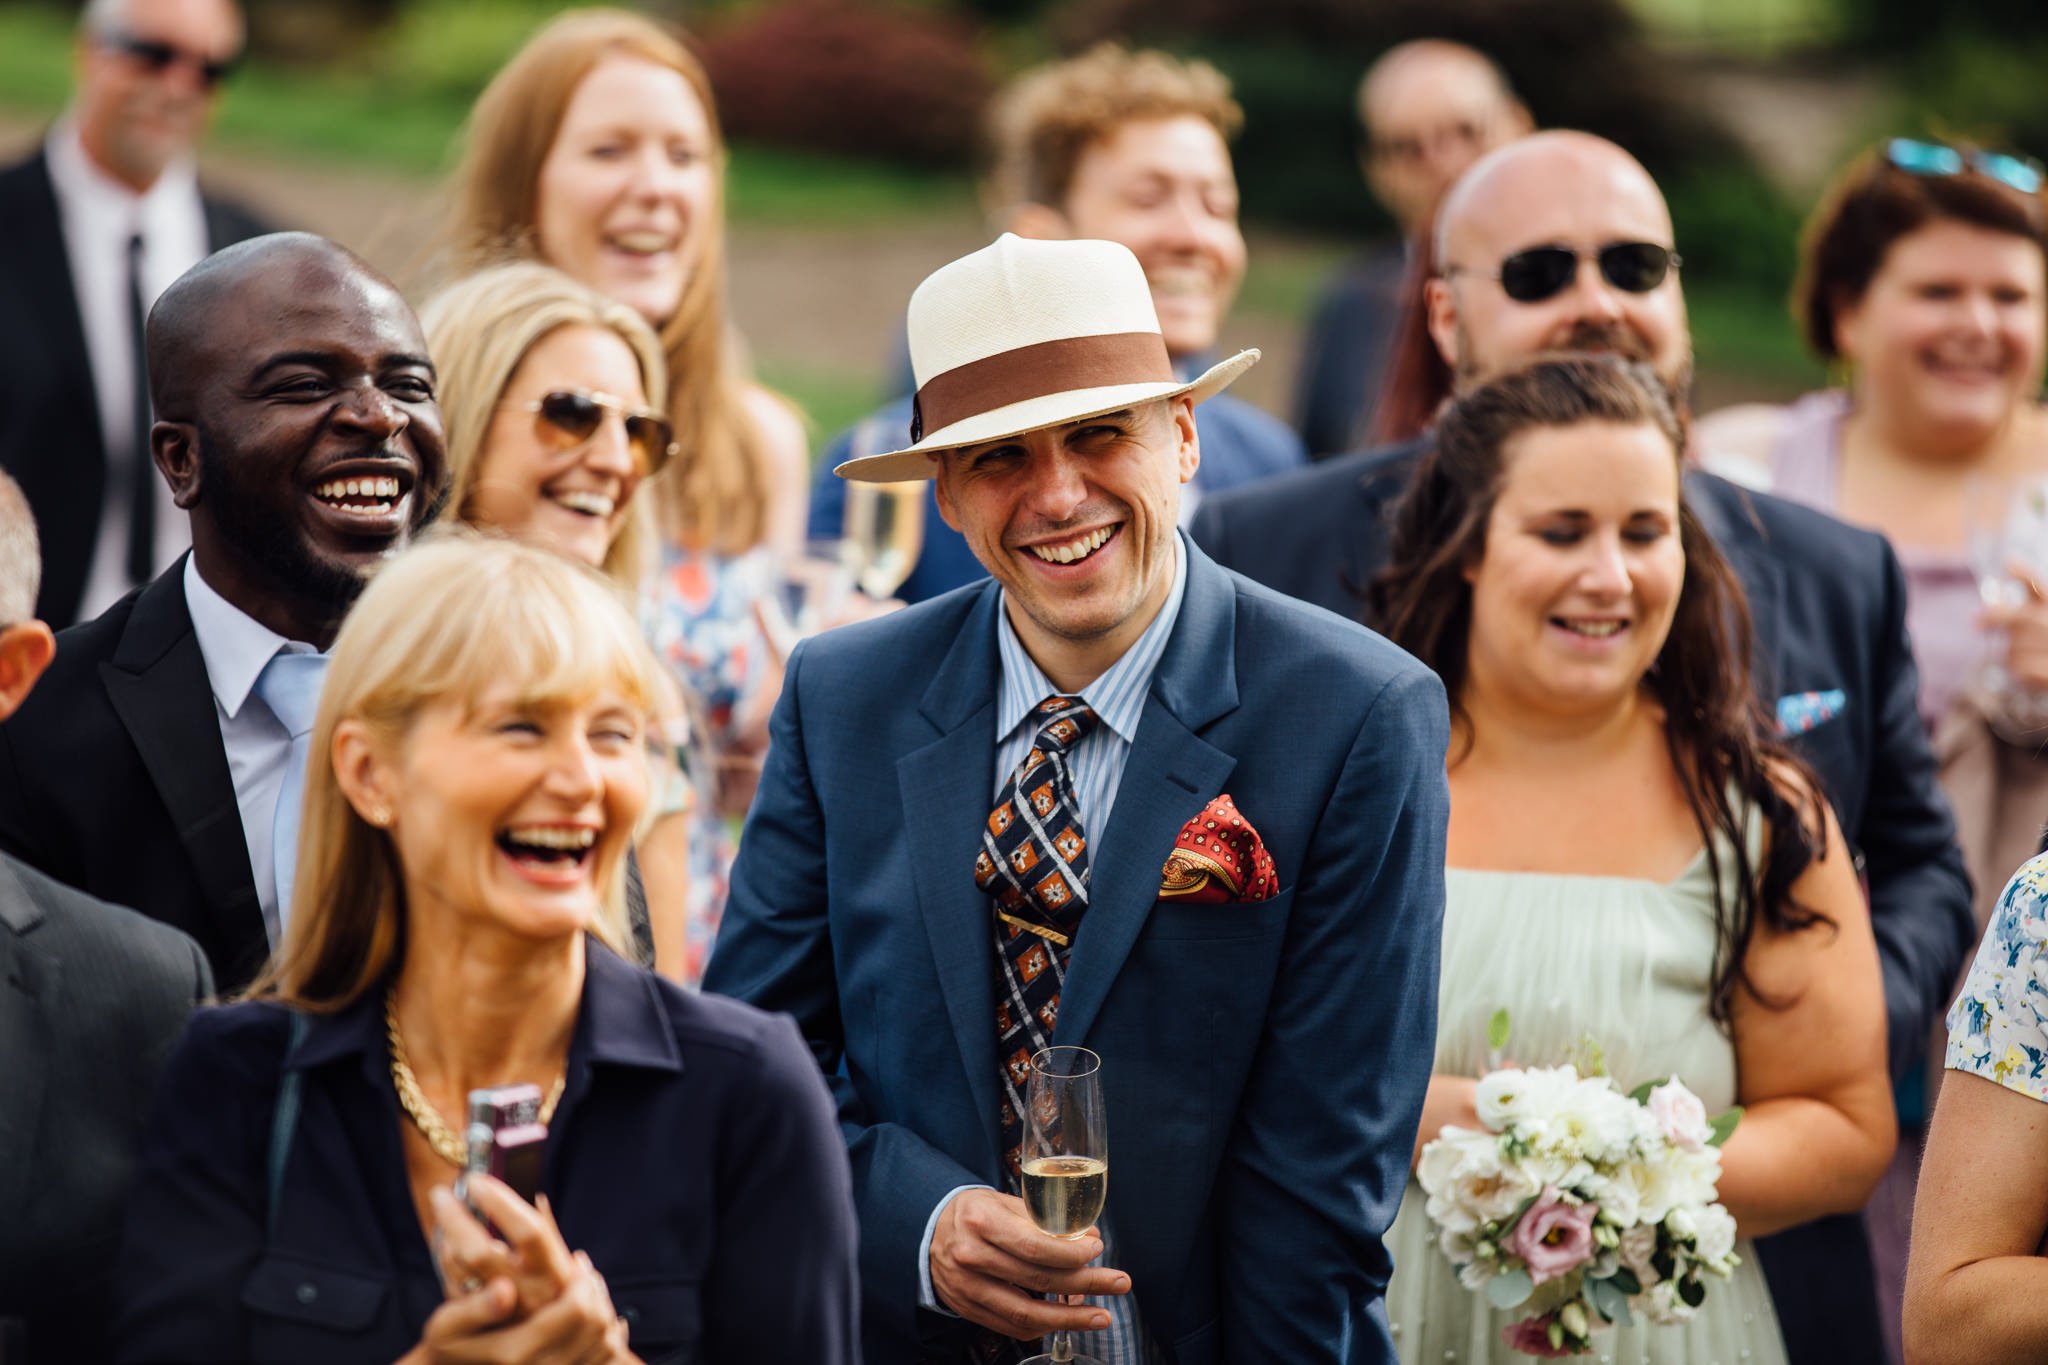  Male wedding guest smiling 